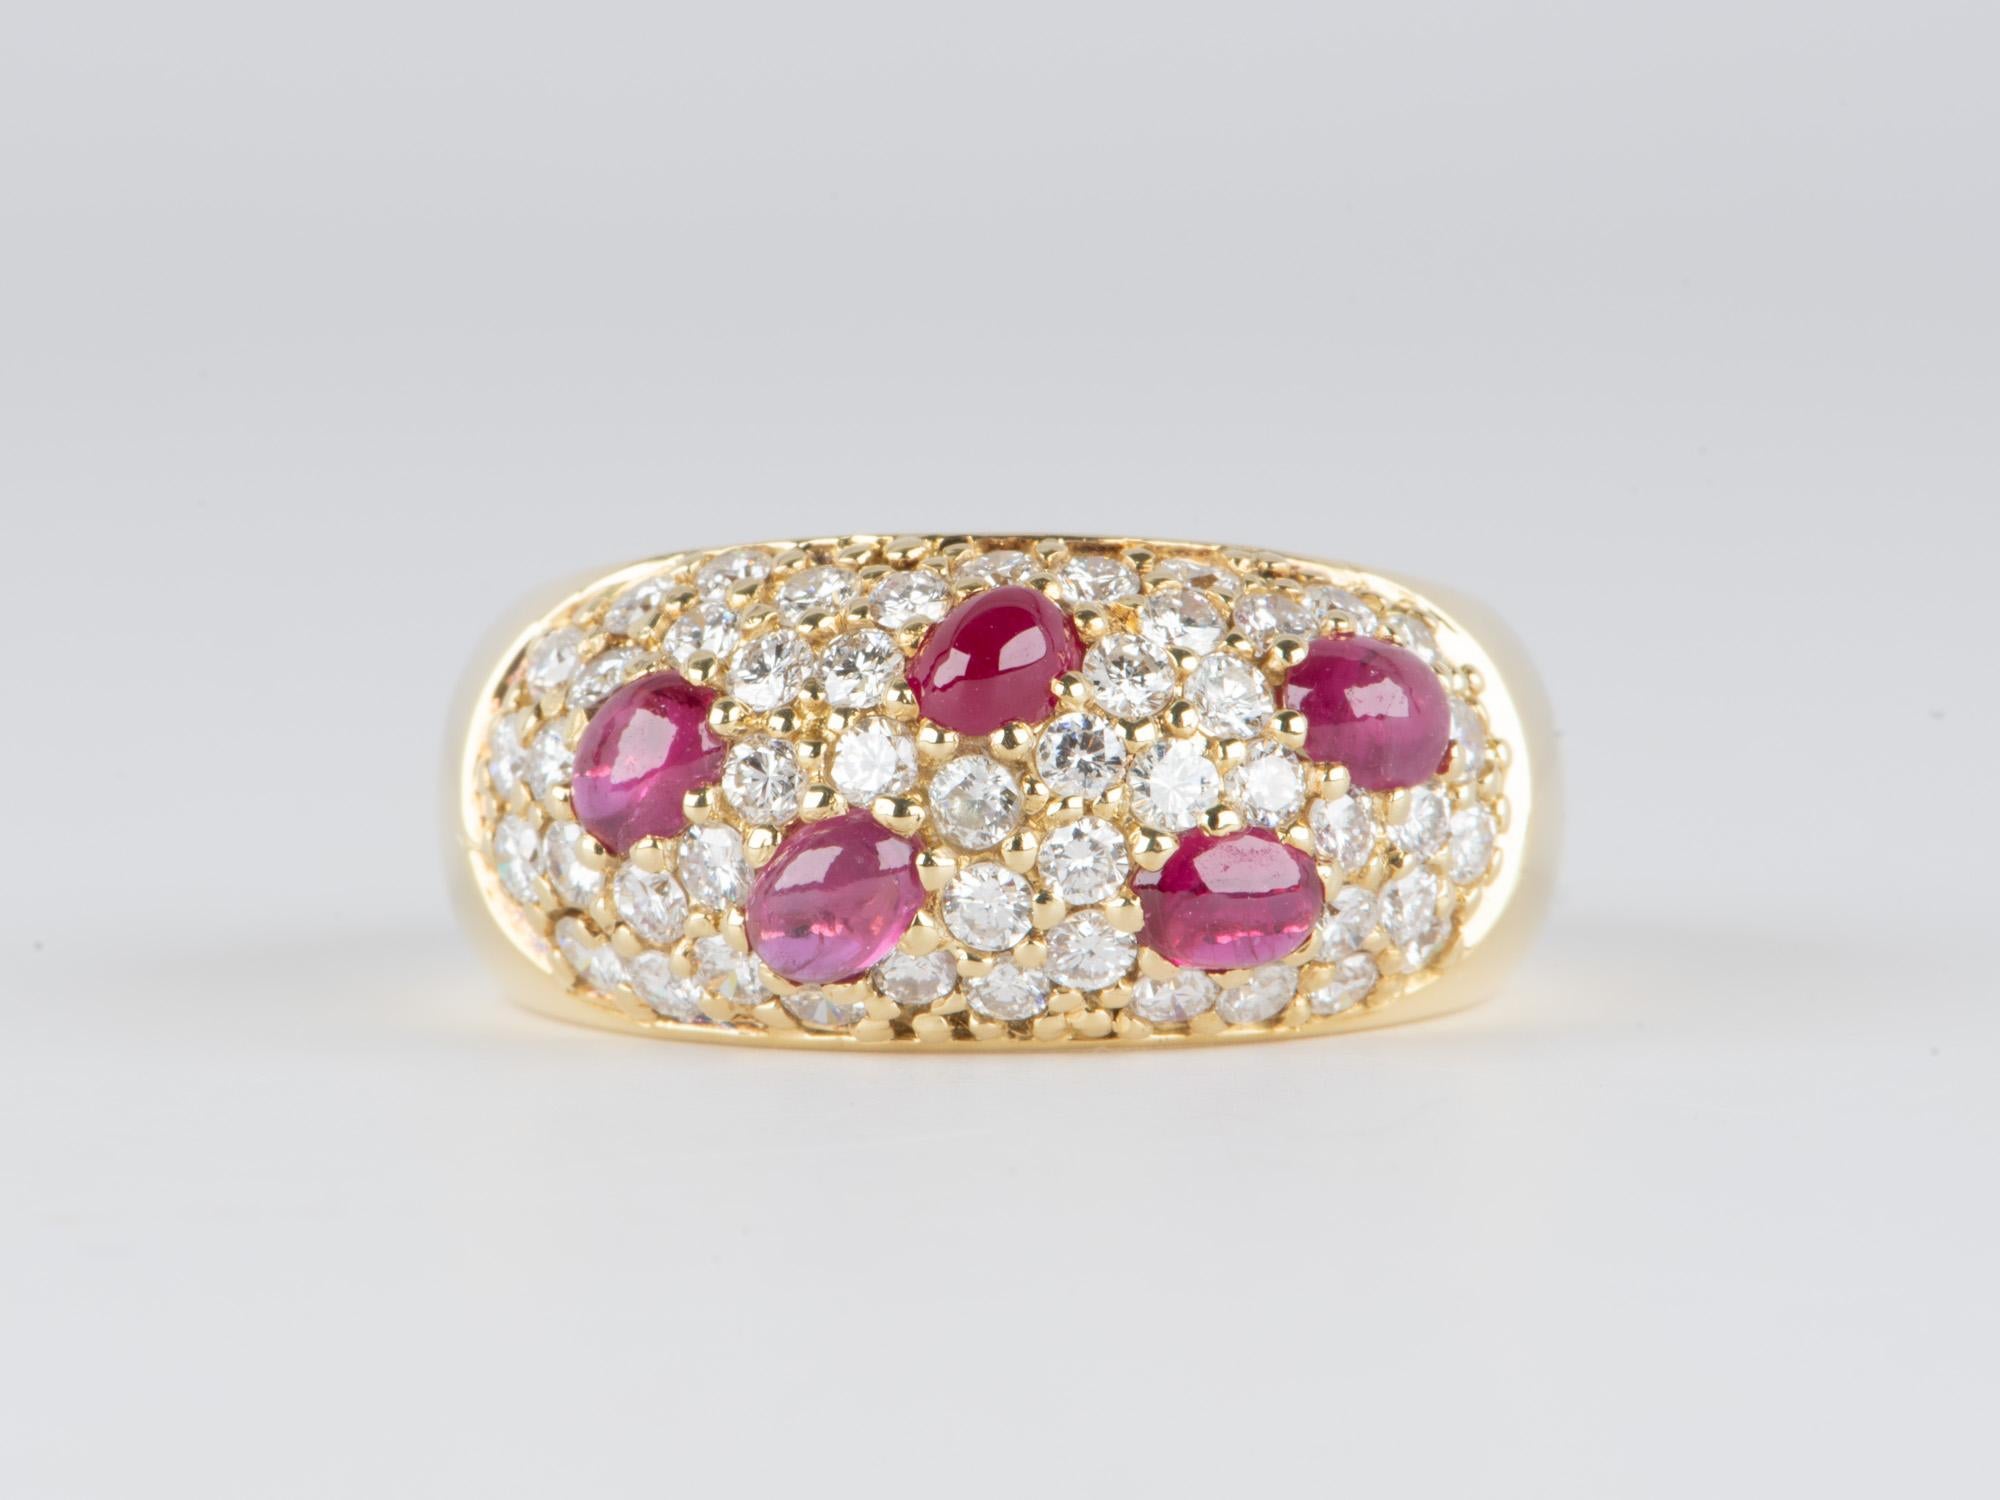 ♥ A slightly domed band featuring sprinkled cabochon rubies in a sea of micro pave set diamonds
♥ Nice weight on the hand, very comfortable to wear
♥ The face of the ring measures 20.7mm in width (East West direction), 9.3mm in length (North South